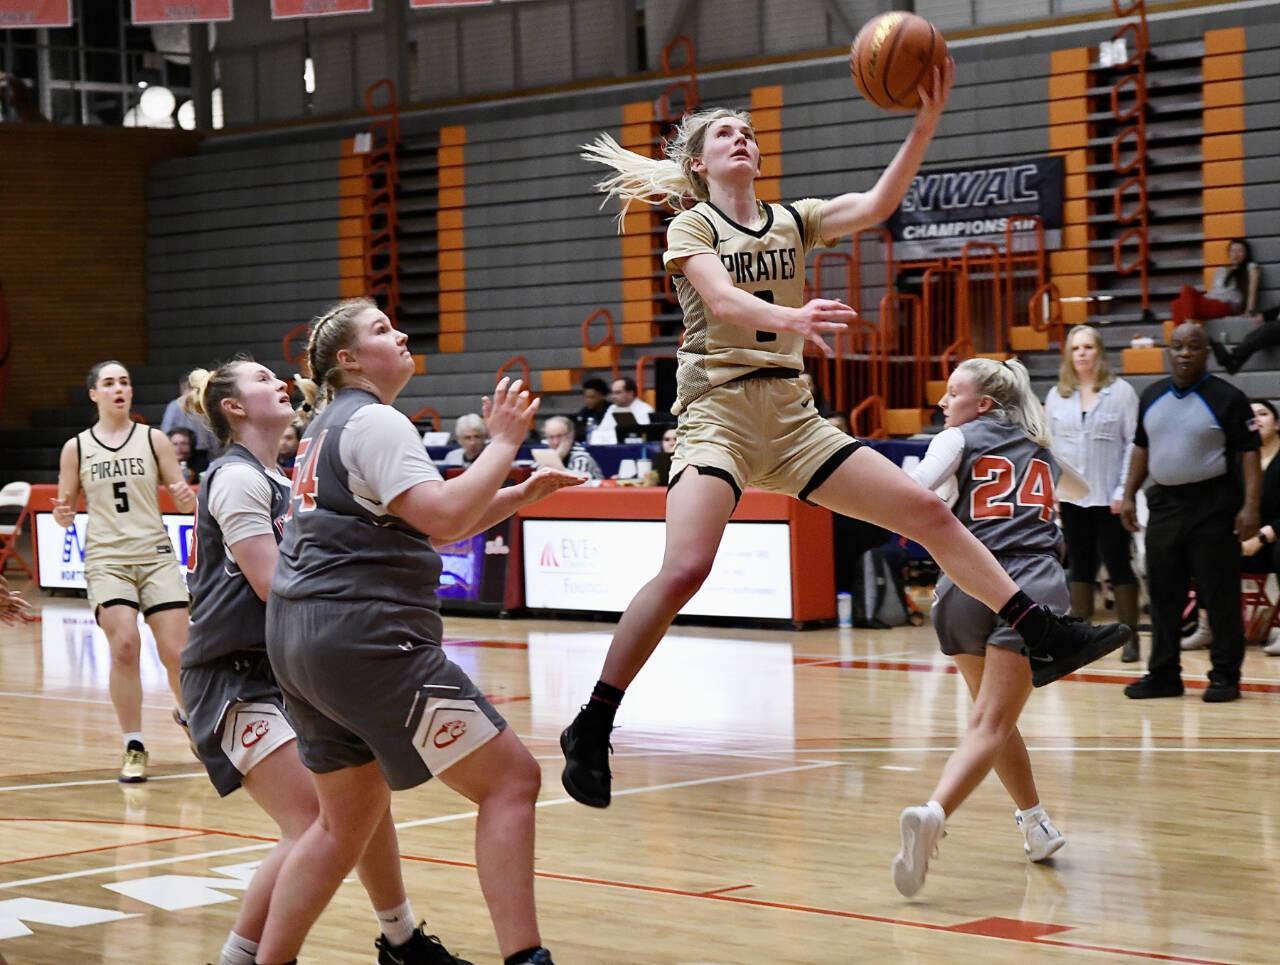 Peninsula College’s Millie Long goes up for a layup and teammate Hope Glasser watches in the background. Long scored 14 points in the fourth quarter to lead the Pirates to a 67-61 win over Clackamas in the NWAC tournament semifinals in Everett on Saturday night. (Jay Cline/Peninsula College Athletics)